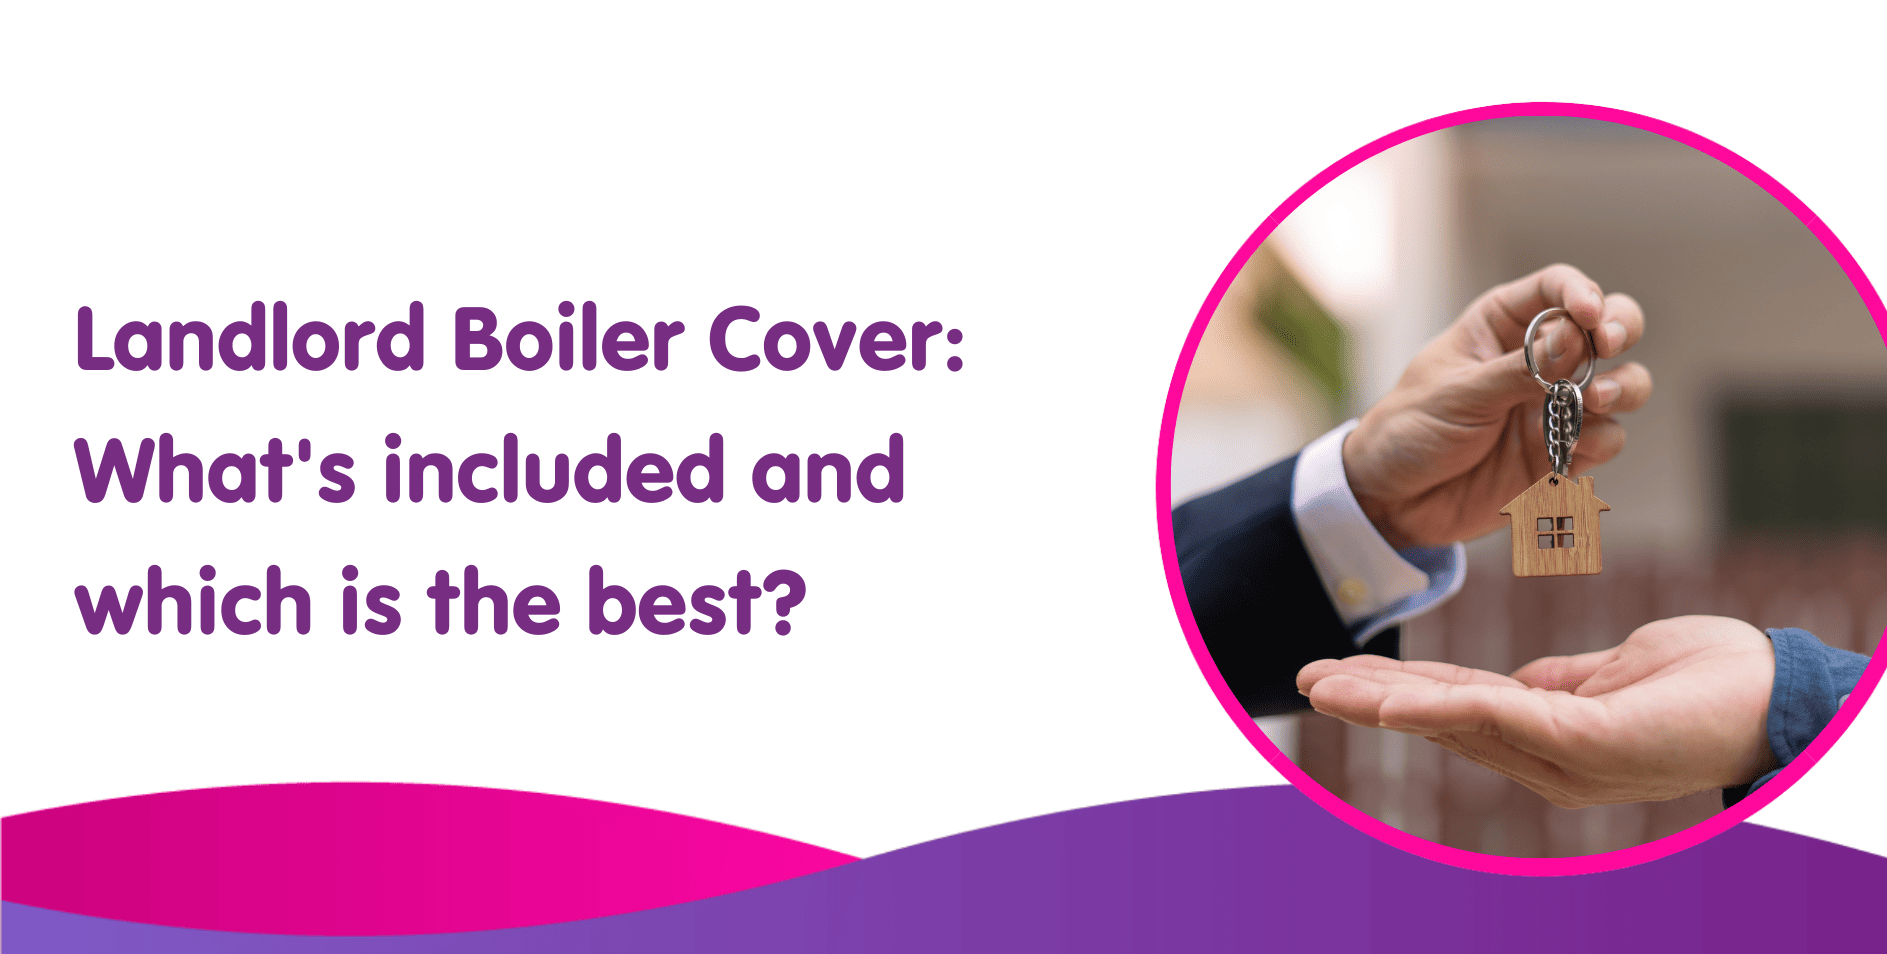 Landlord Boiler Cover? What's included and which is the best